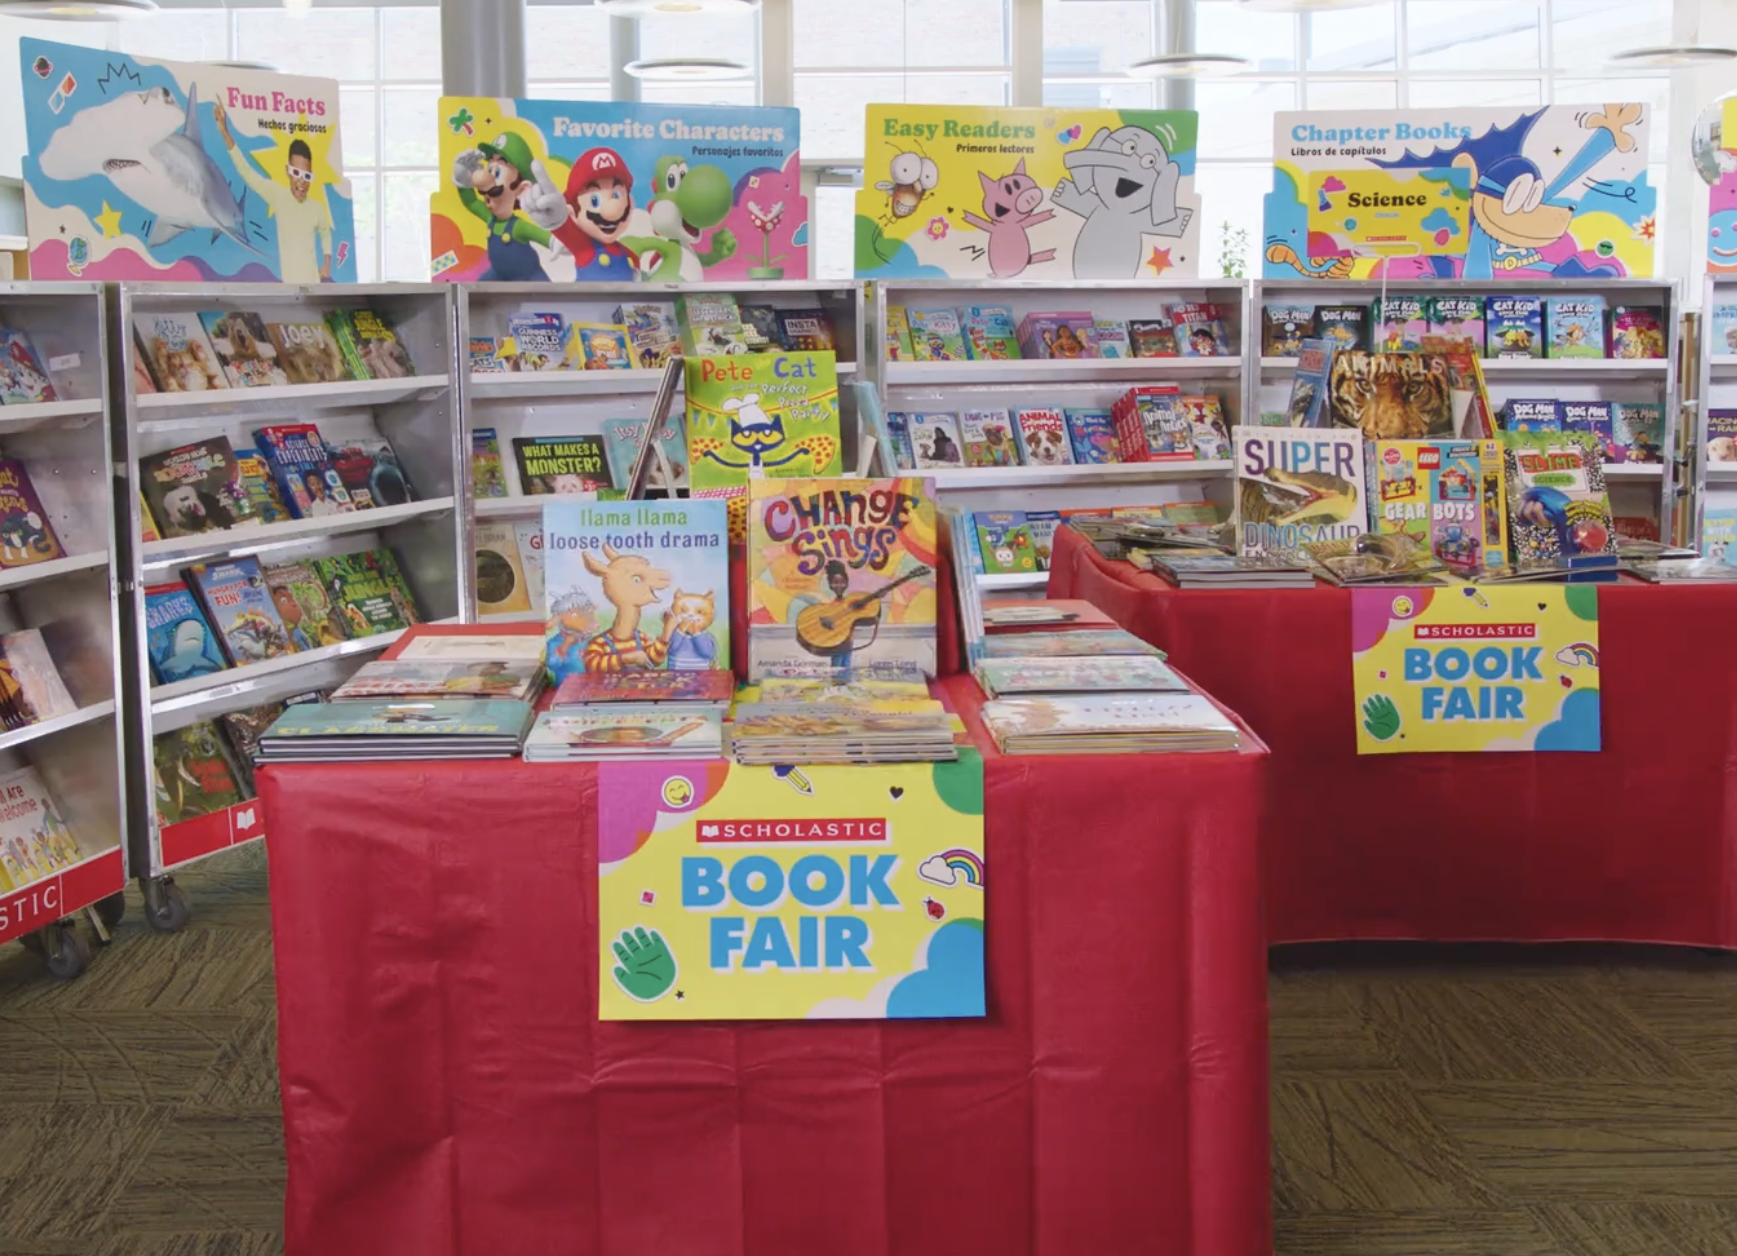 Scholastic Apologizes, Will End Controversial Book Fair Policy